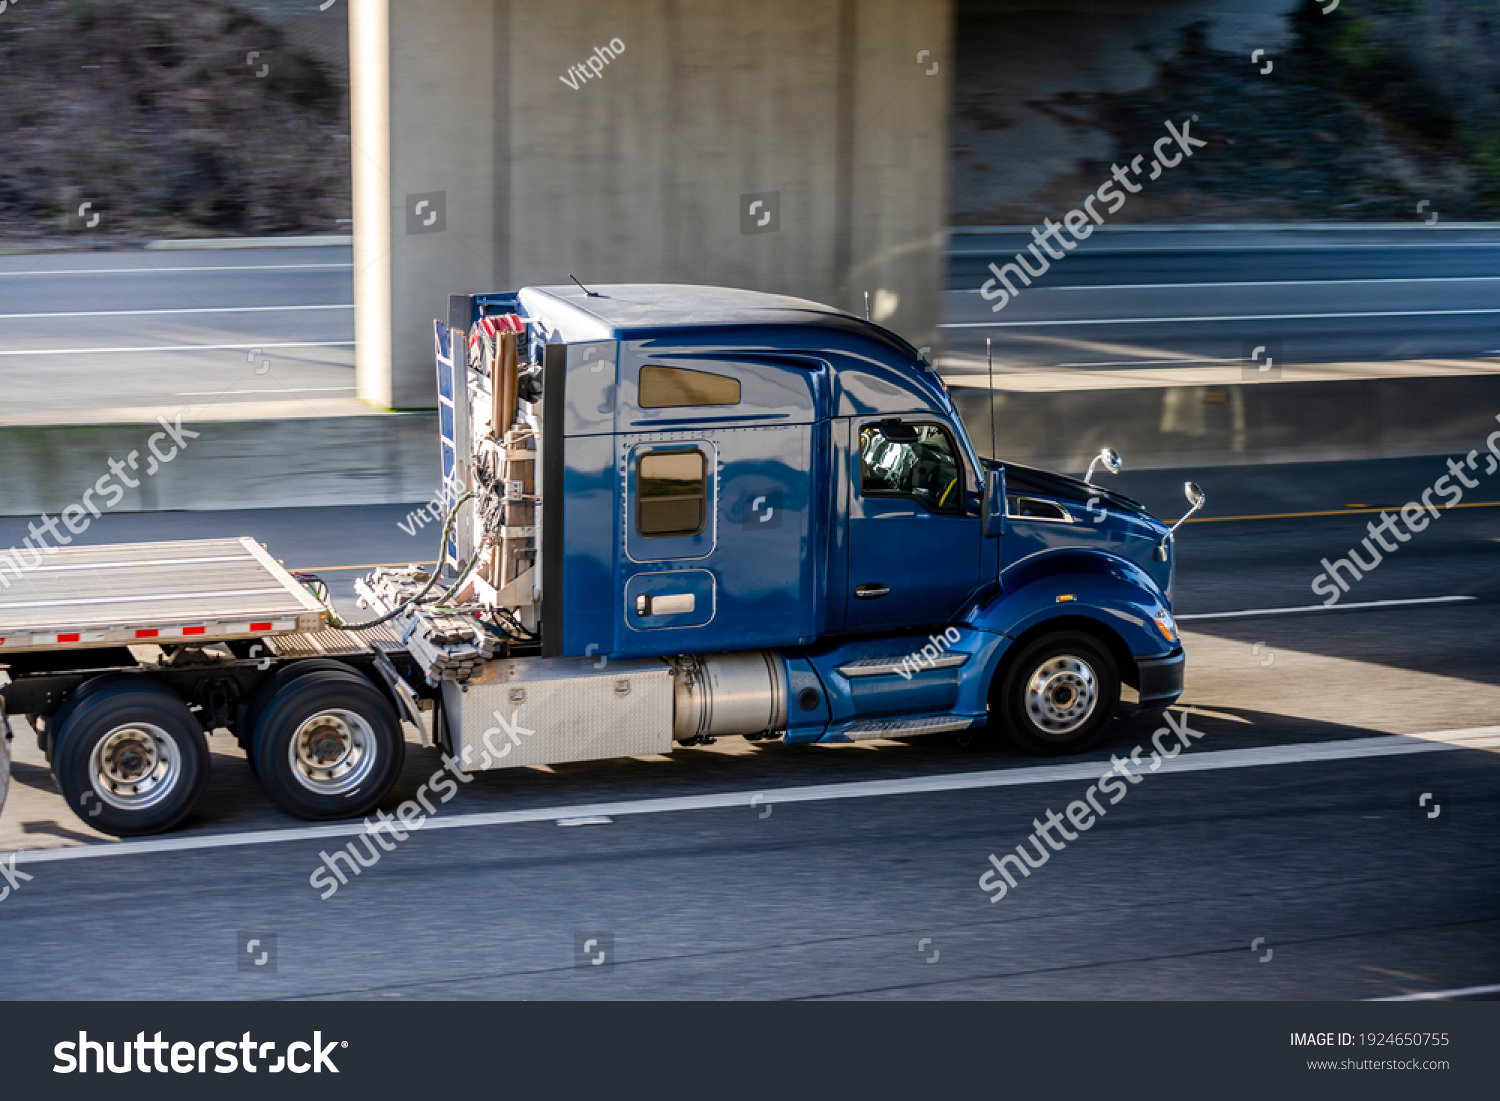 Big rig shiny blue semi truck tractor with long cab and auxiliary equipment on the back wall transporting flat bed semi trailer driving on the highway road under the concrete bridge #1924650755